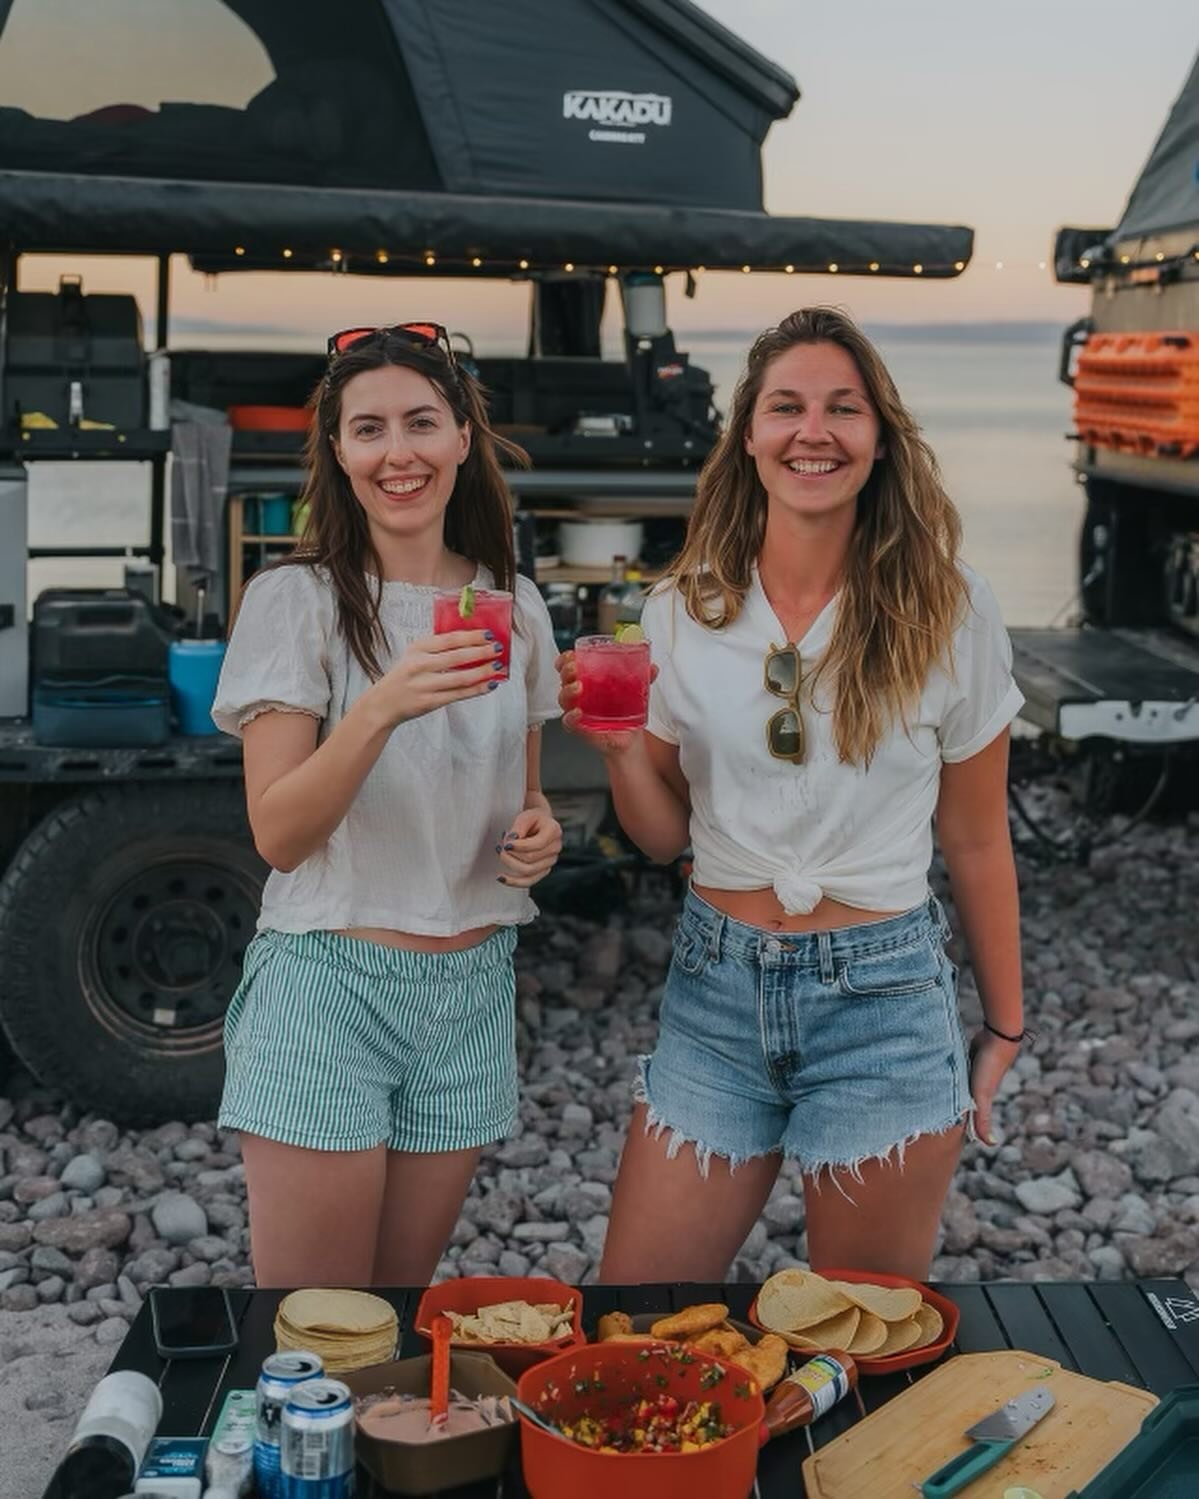 Hi hi hello! We&rsquo;re Ali and Caroline, otherwise known as the wyld honeys. We&rsquo;re two lifelong best friends who share a love of cooking and dining in the outdoors, infusing a sense of adventure into every meal. 

We develop and share seasona